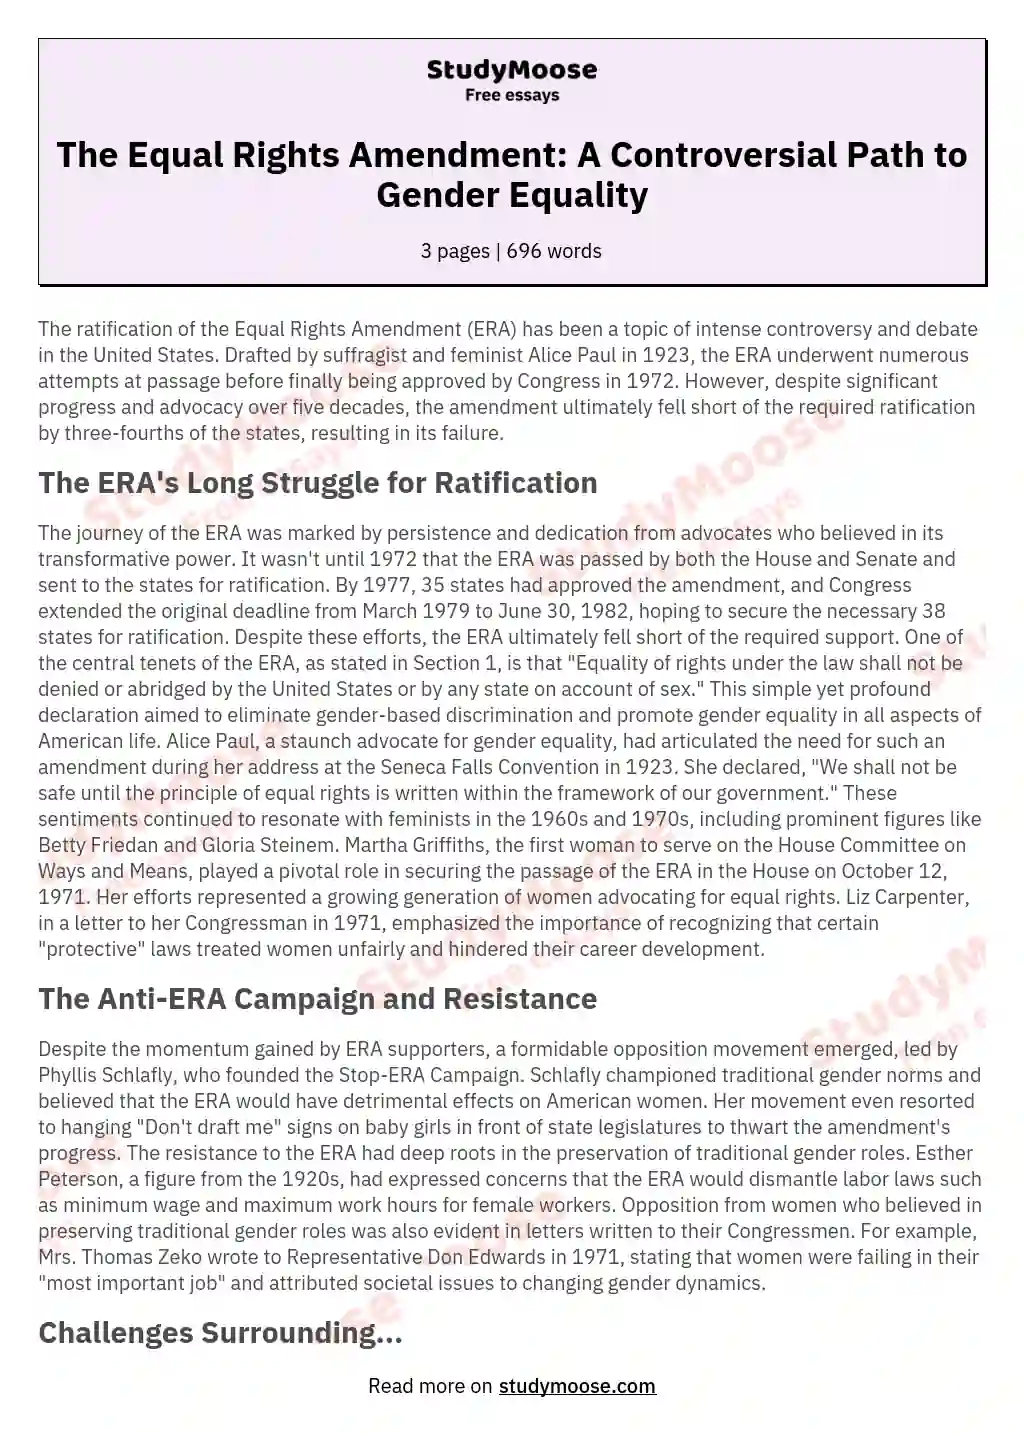 The Equal Rights Amendment: A Controversial Path to Gender Equality essay